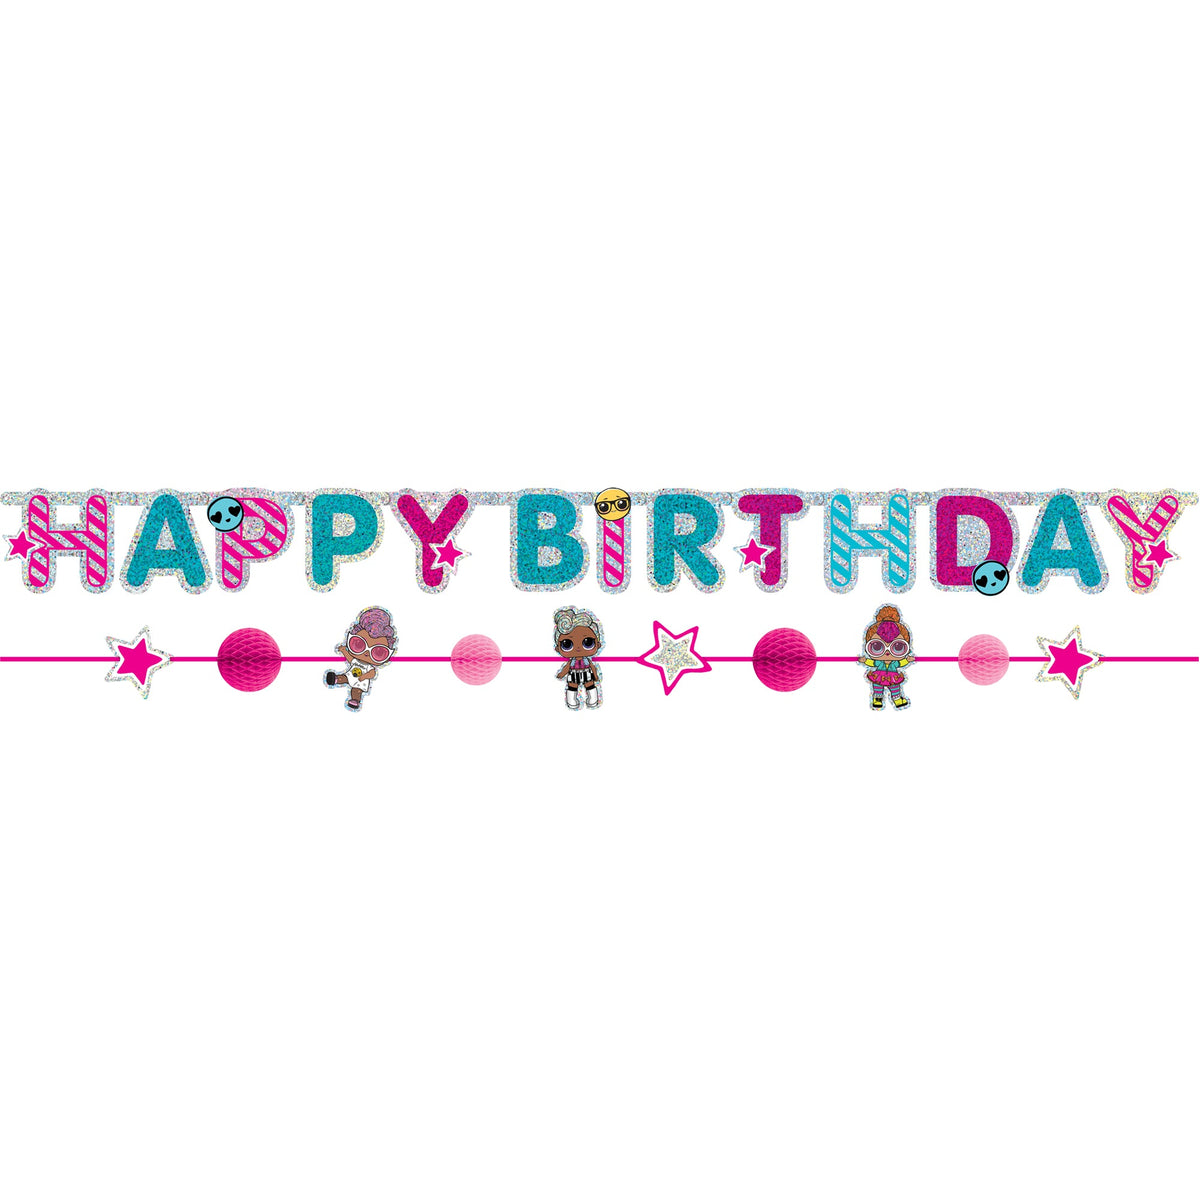 LOL Surprise, Together 4 Eva! 2pack "Happy Birthday" Banner  Kit 6' x 6 1/2" and 1 banner 5 3/4' x 6 1/2"